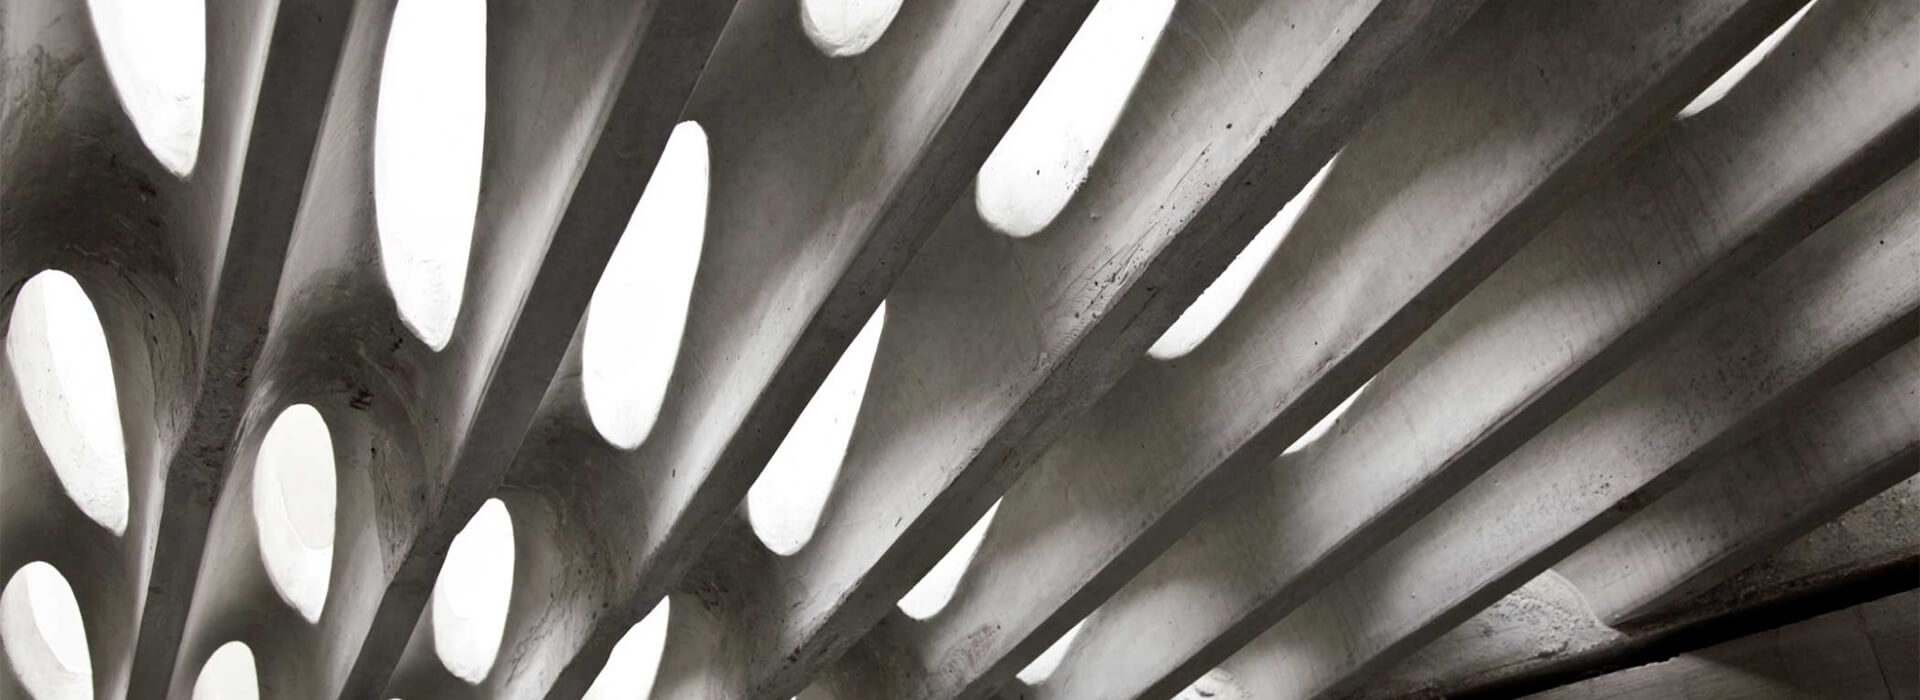 Closeup image of the concrete ceiling at the Clyfford Still Museum